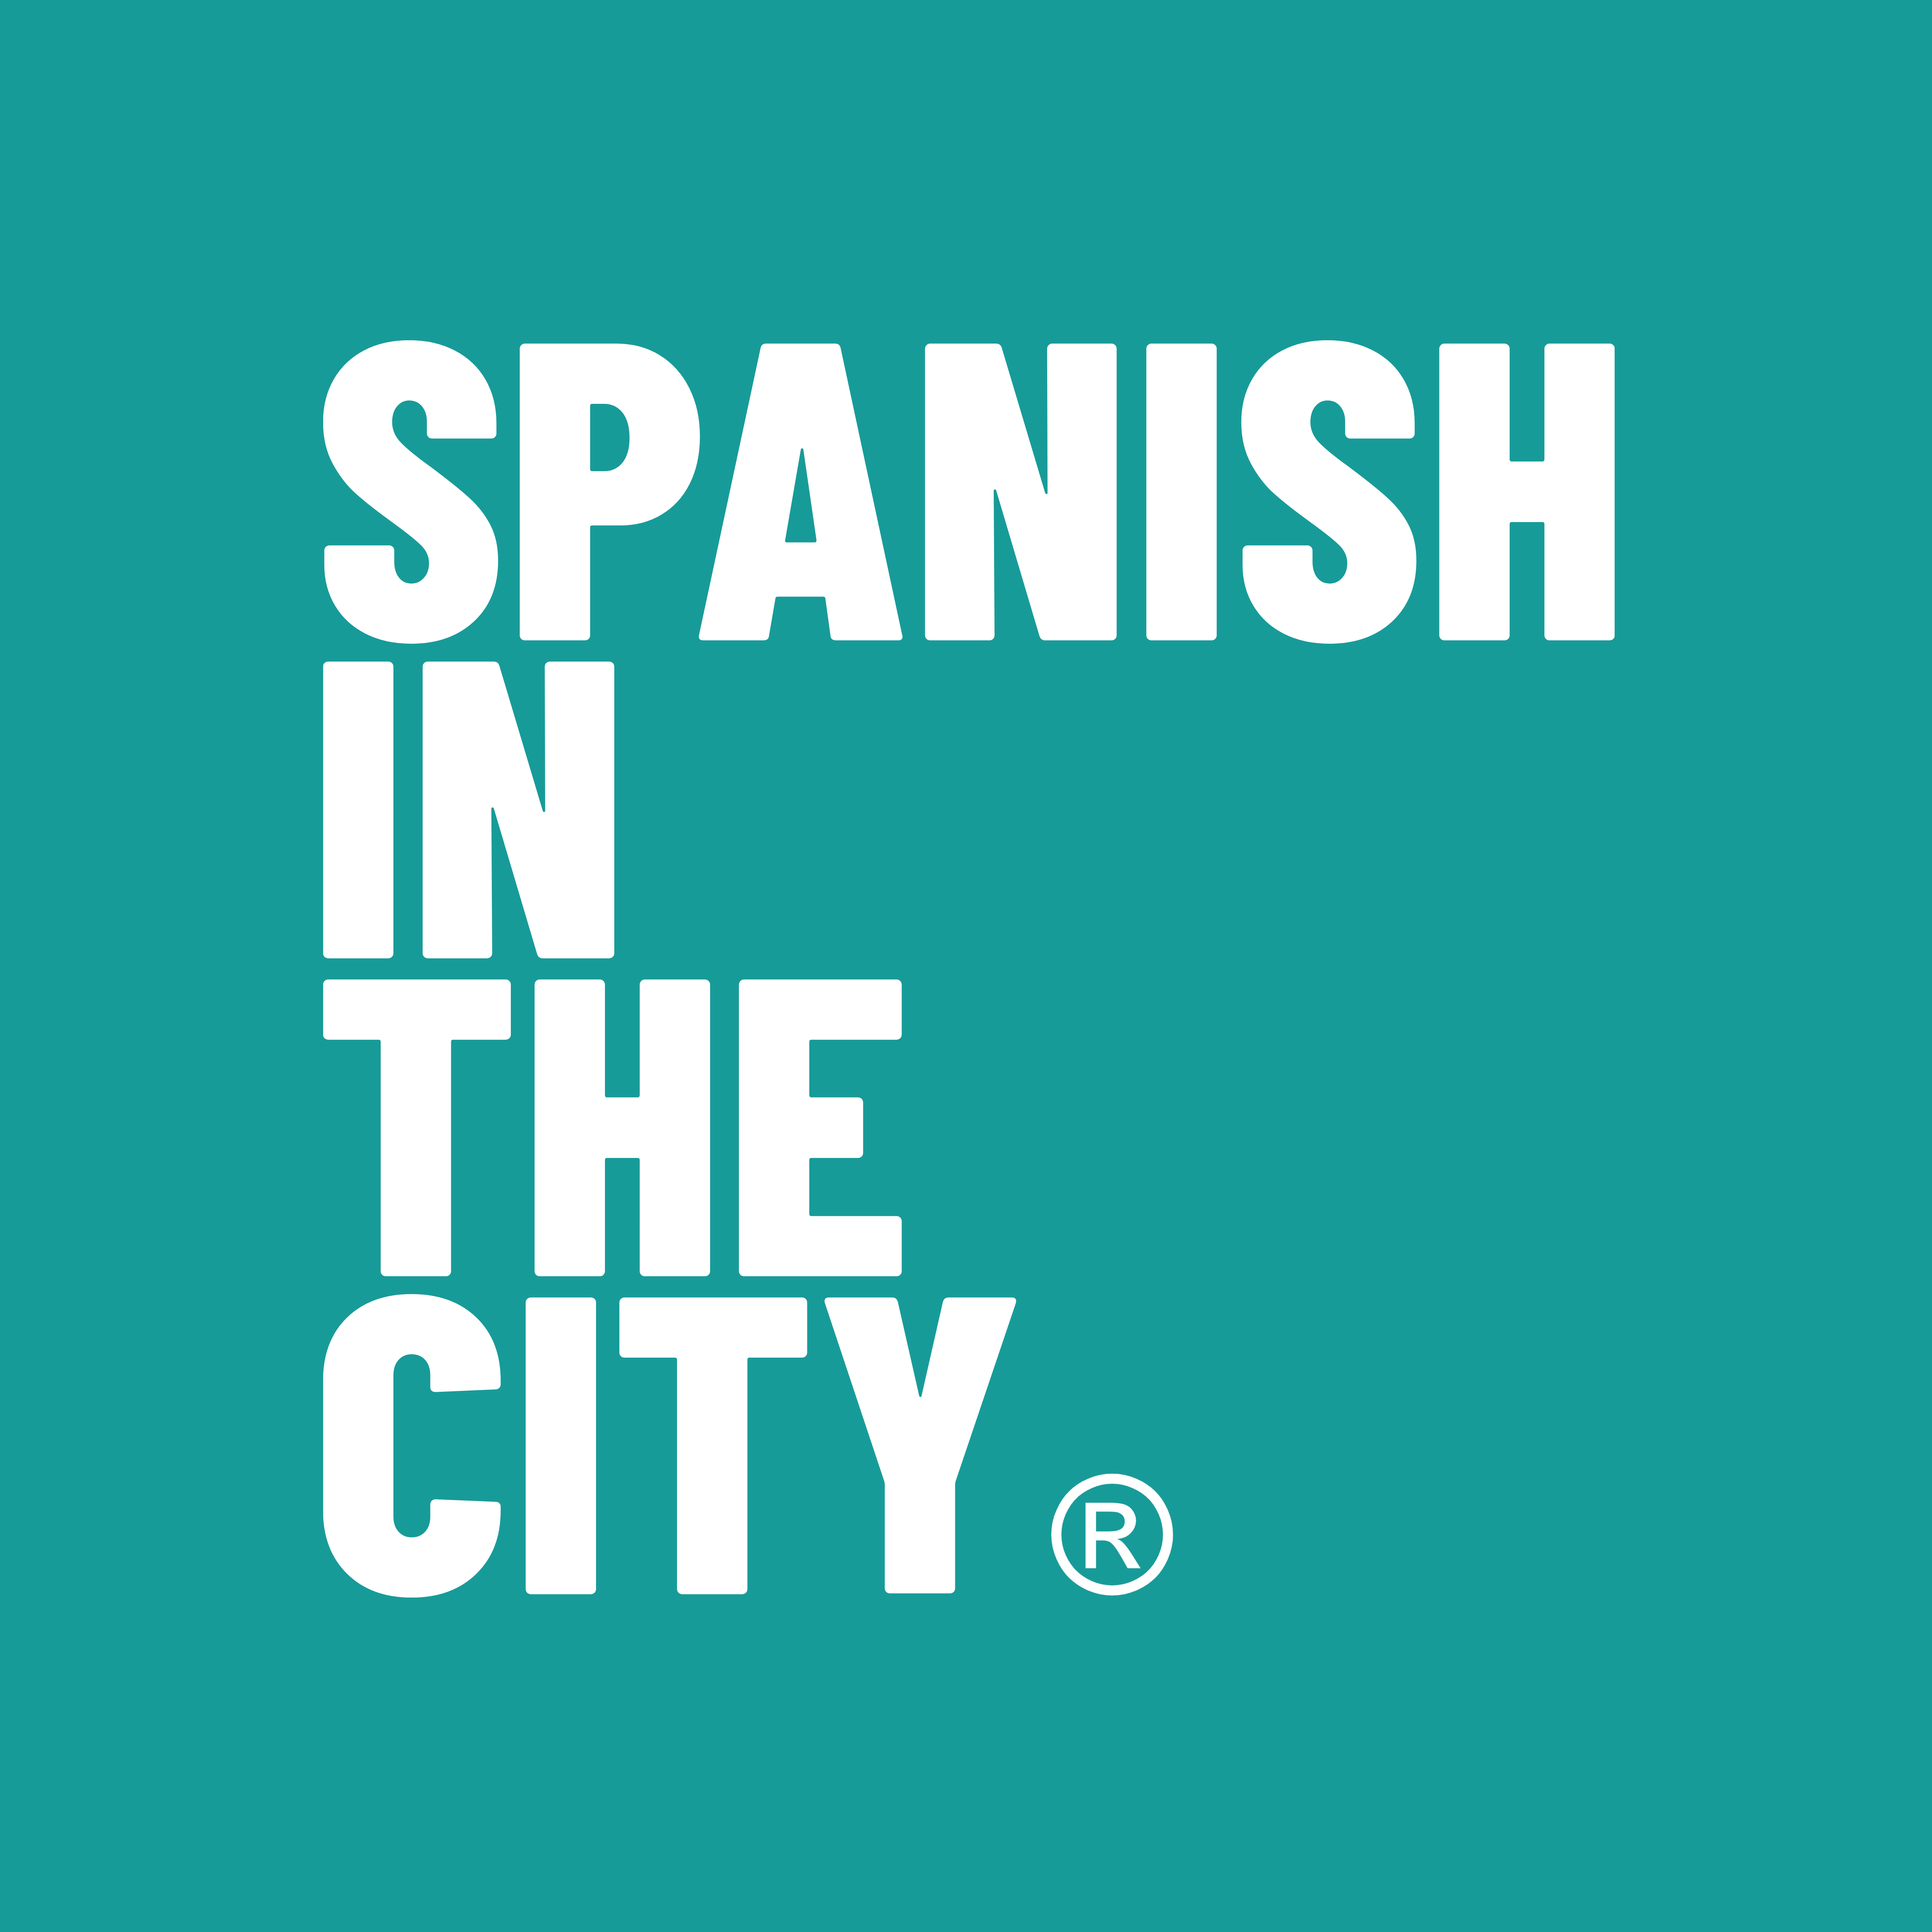 Online Spanish Courses for Lawyers, Business People and Civil Servants